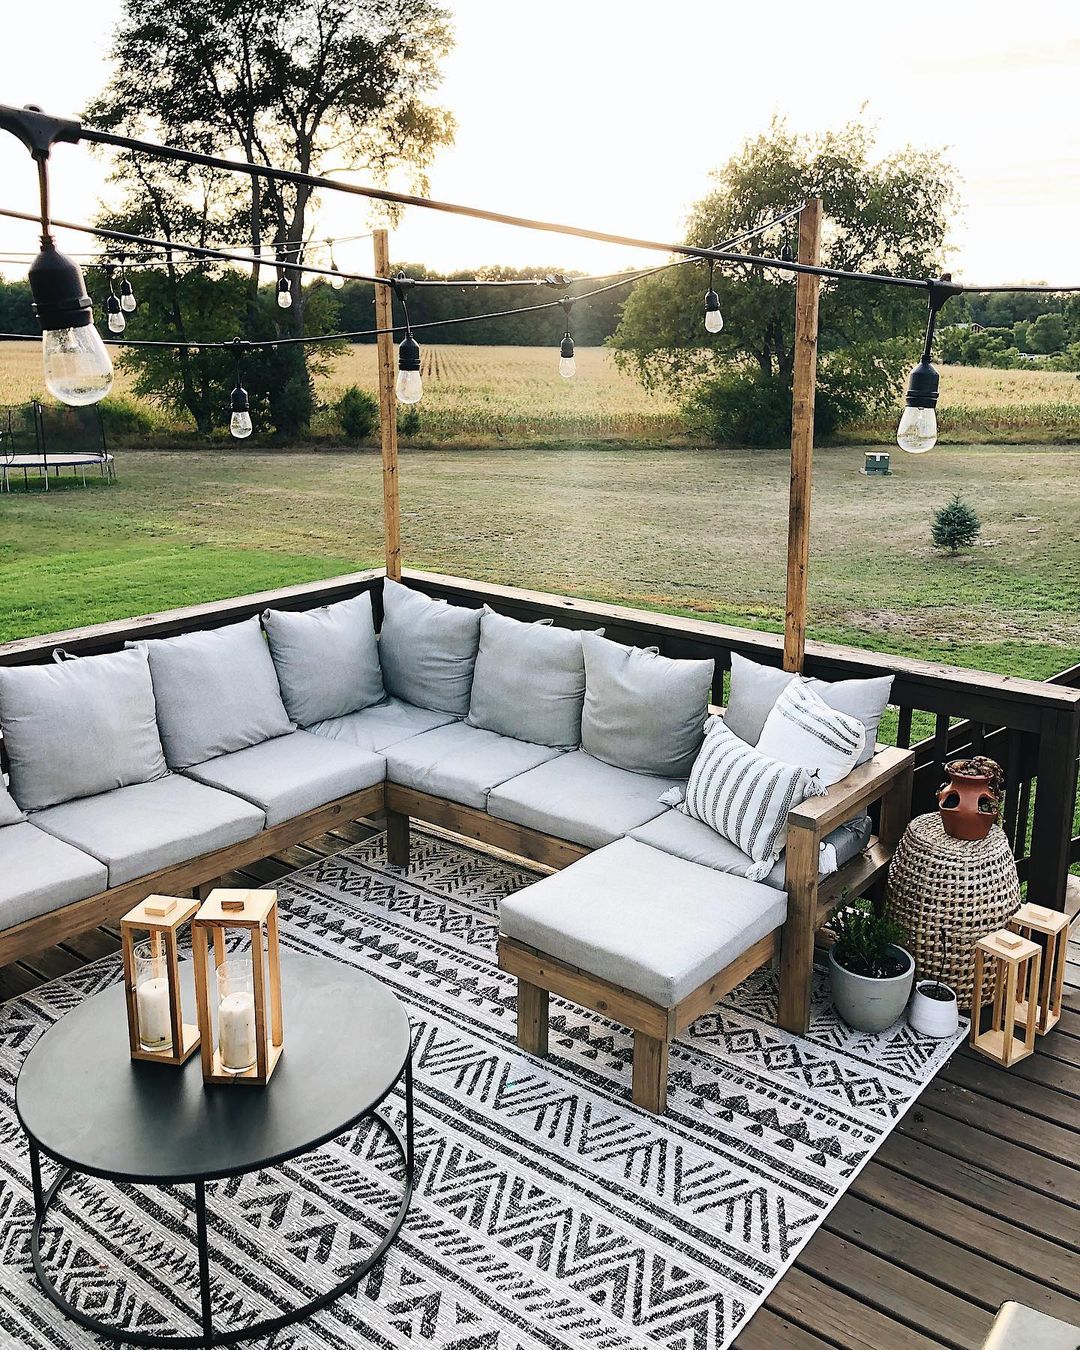 21 Diy Outdoor Furniture Ideas For Your